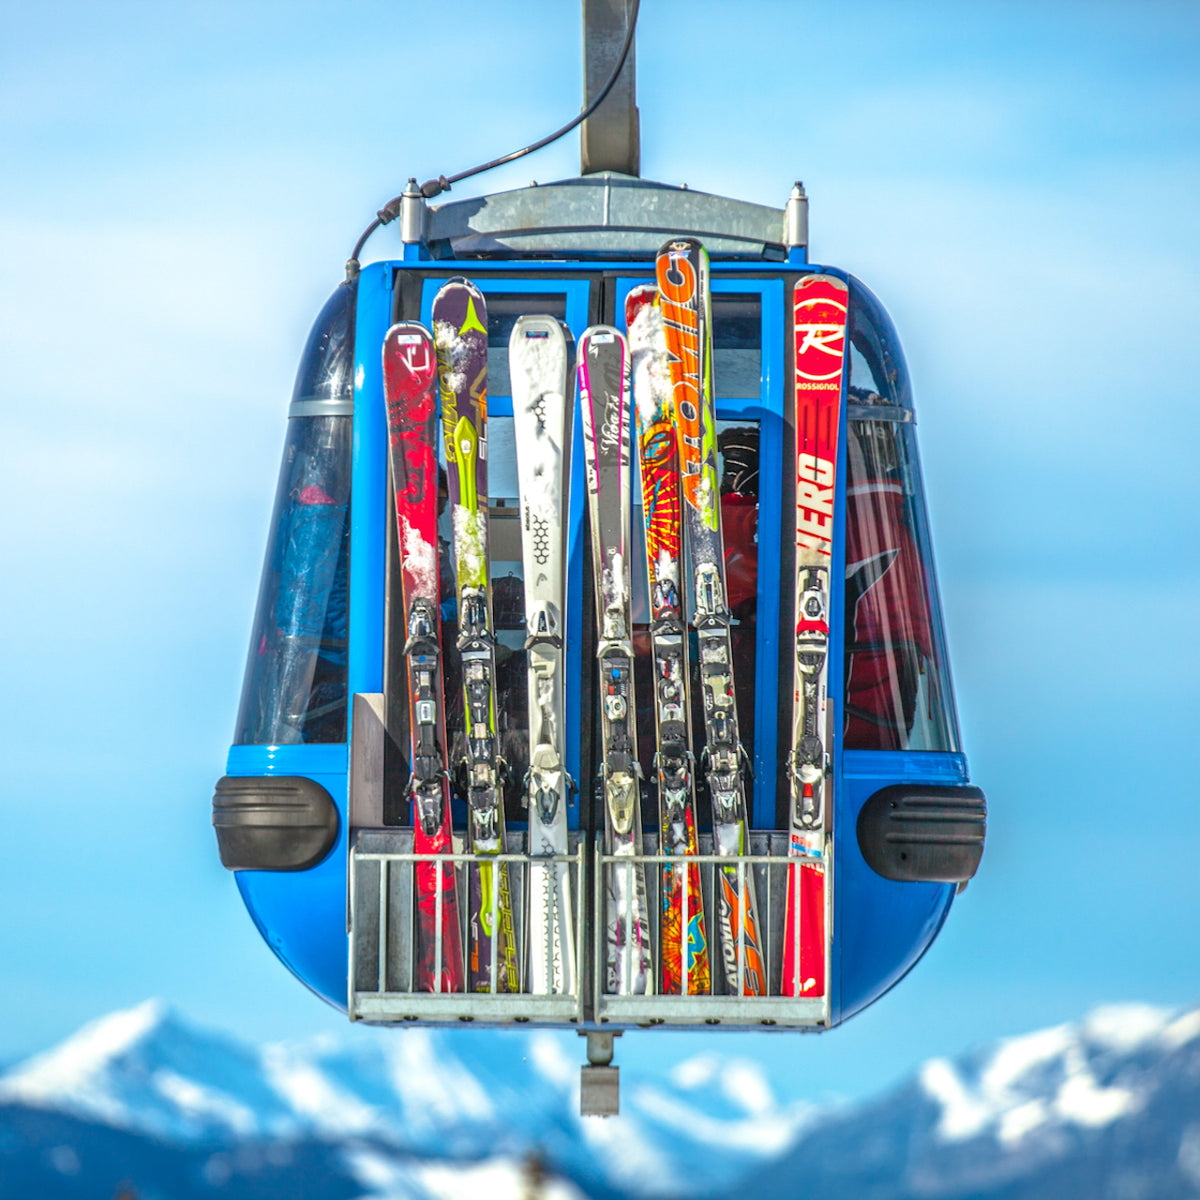 A gondola carrying 8 pairs of different colored skis up the mountain.